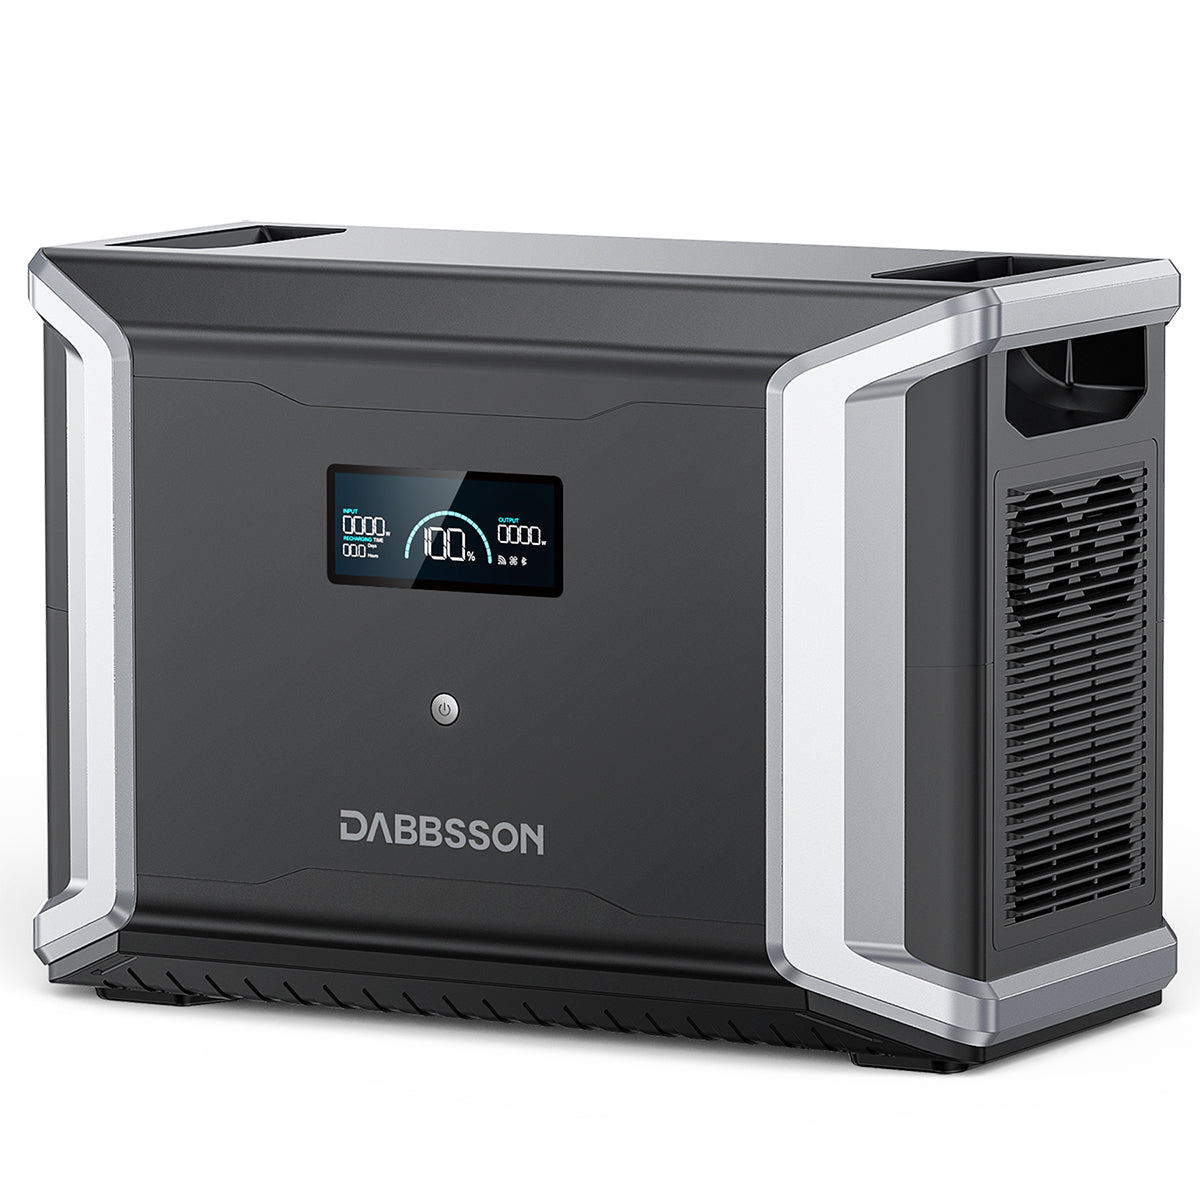 Dabbsson DBS3000B Expandable Battery | 3000Wh（Only works with DBS2300 & DBS2300 Plus） - Dabbsson US